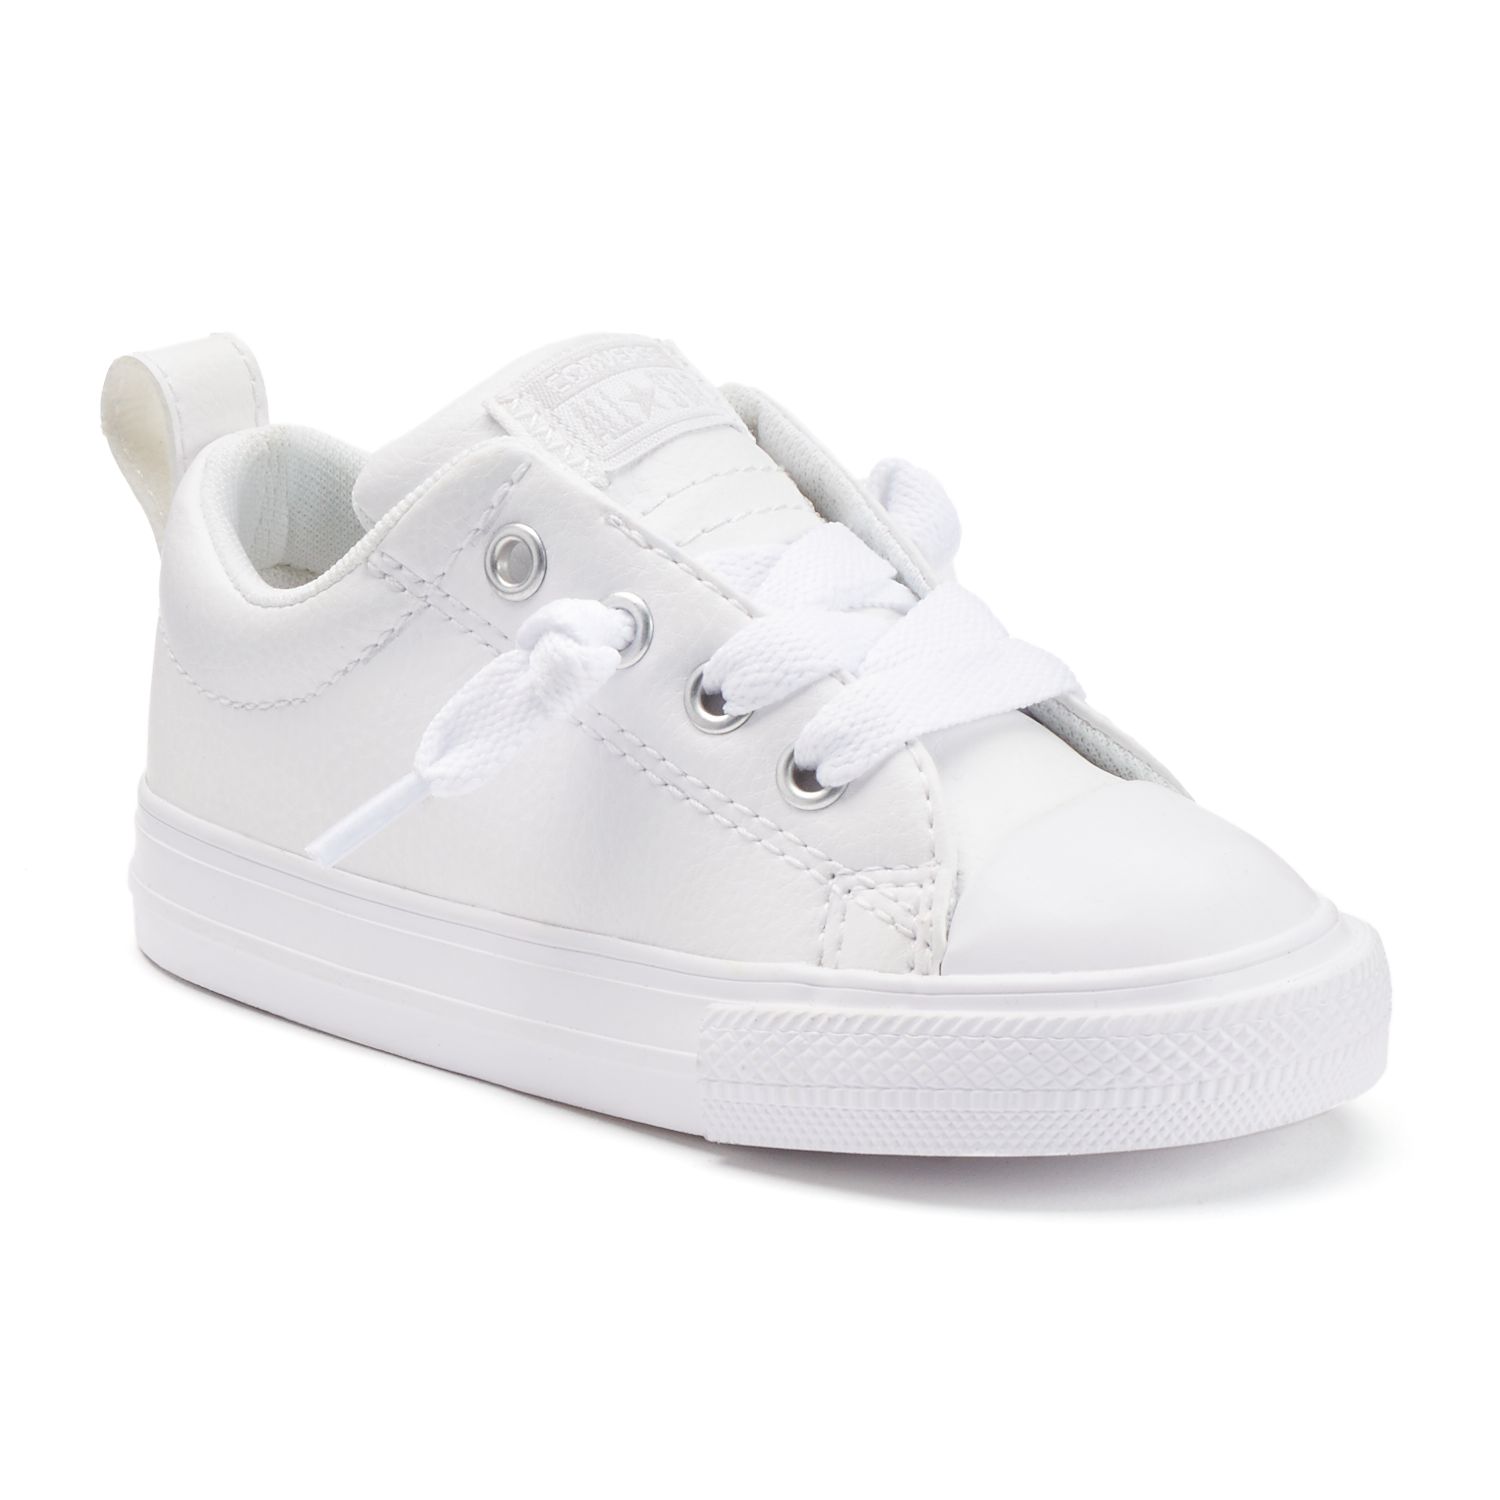 leather converse toddler